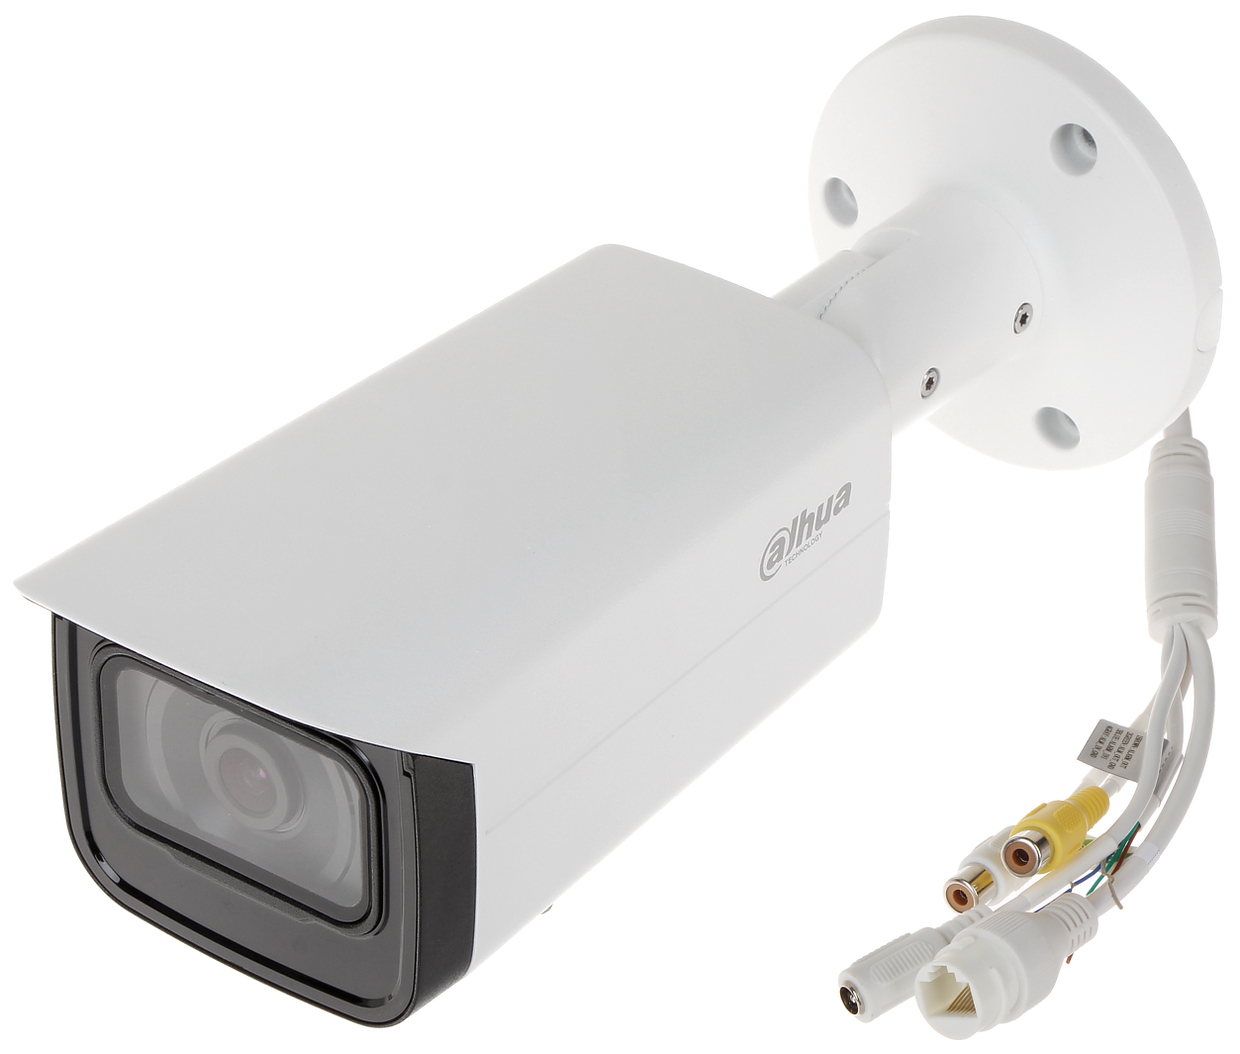 IP CAMERA IPC-HFW5442T-ASE-0360B - 4 Mpx 3.6 mm DAHUA - IP Cameras with  Fixed-Focal Lens and Ifra-Red Illumina... - Delta